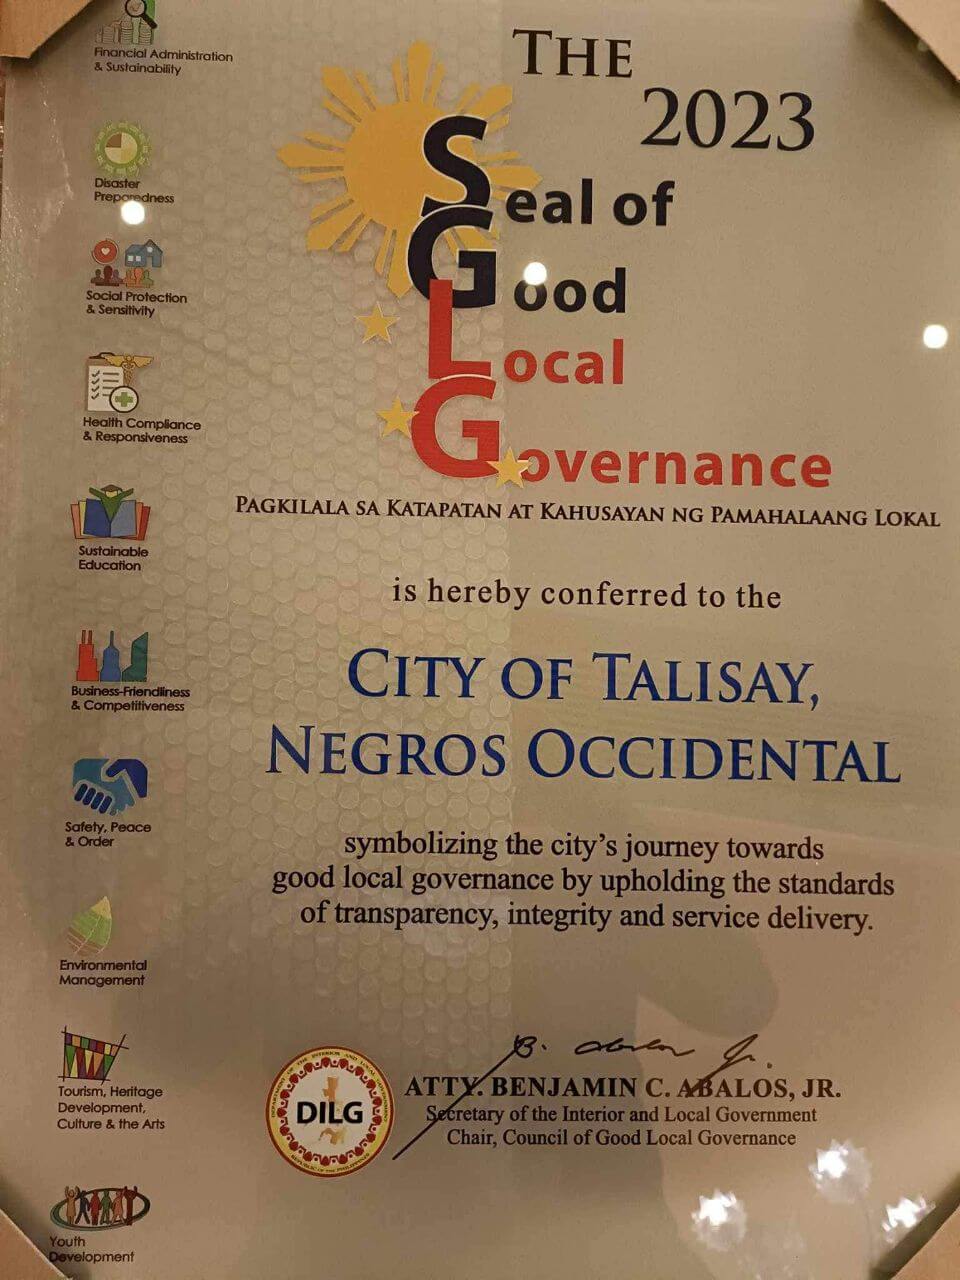 City of Talisay Receives Seal of Good Local Governance Award 2023